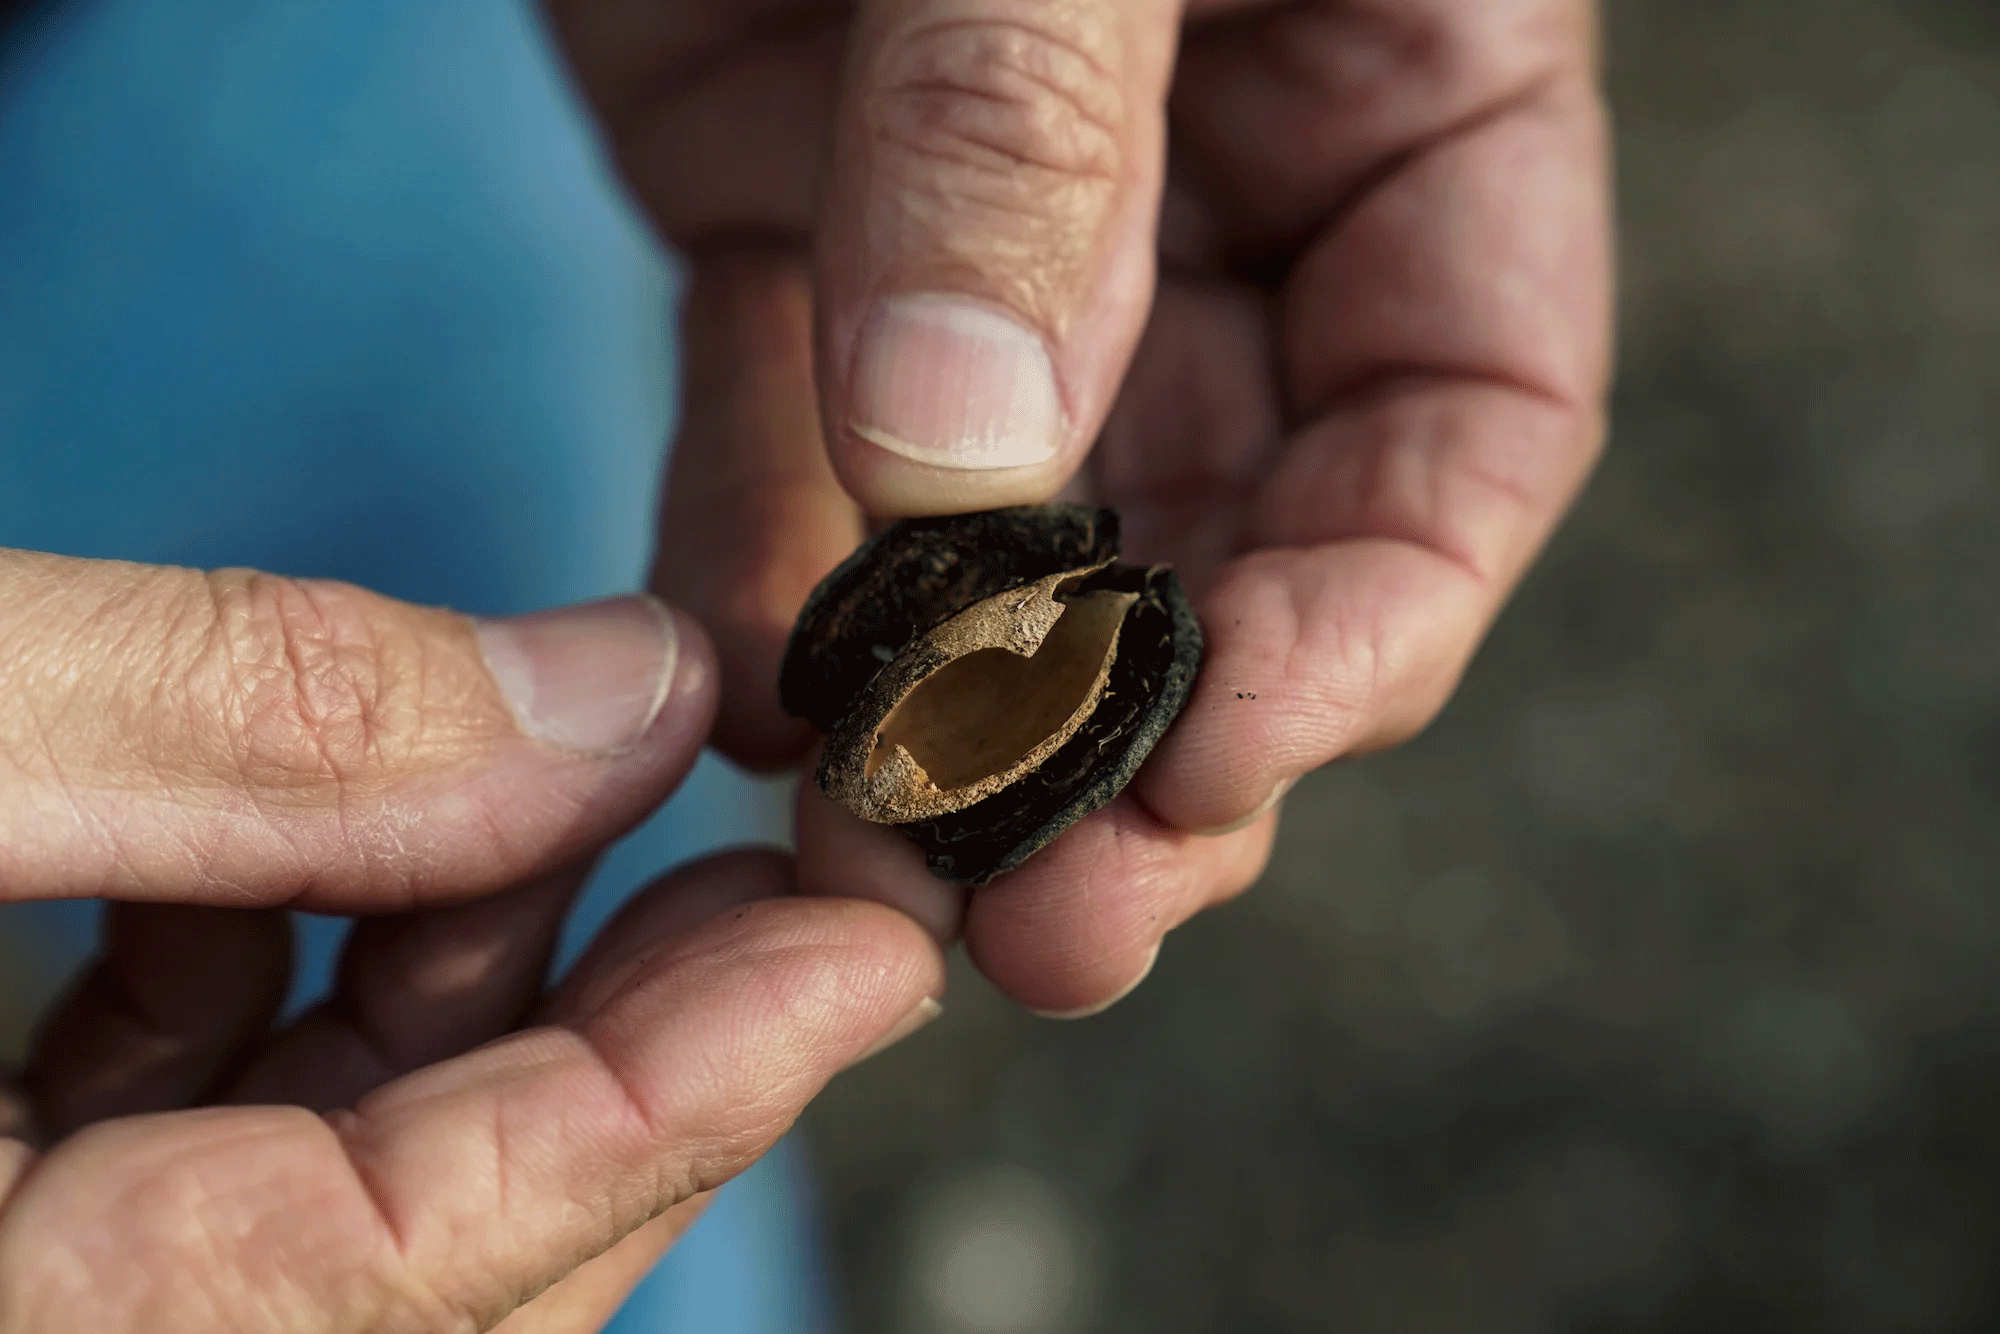 Kirk Pumphrey of Westwind Farms examines the hull of an almond. He’s using hulls and shells as mulch in his orchard to increase soil moisture. (Karin Higgins/UC Davis)